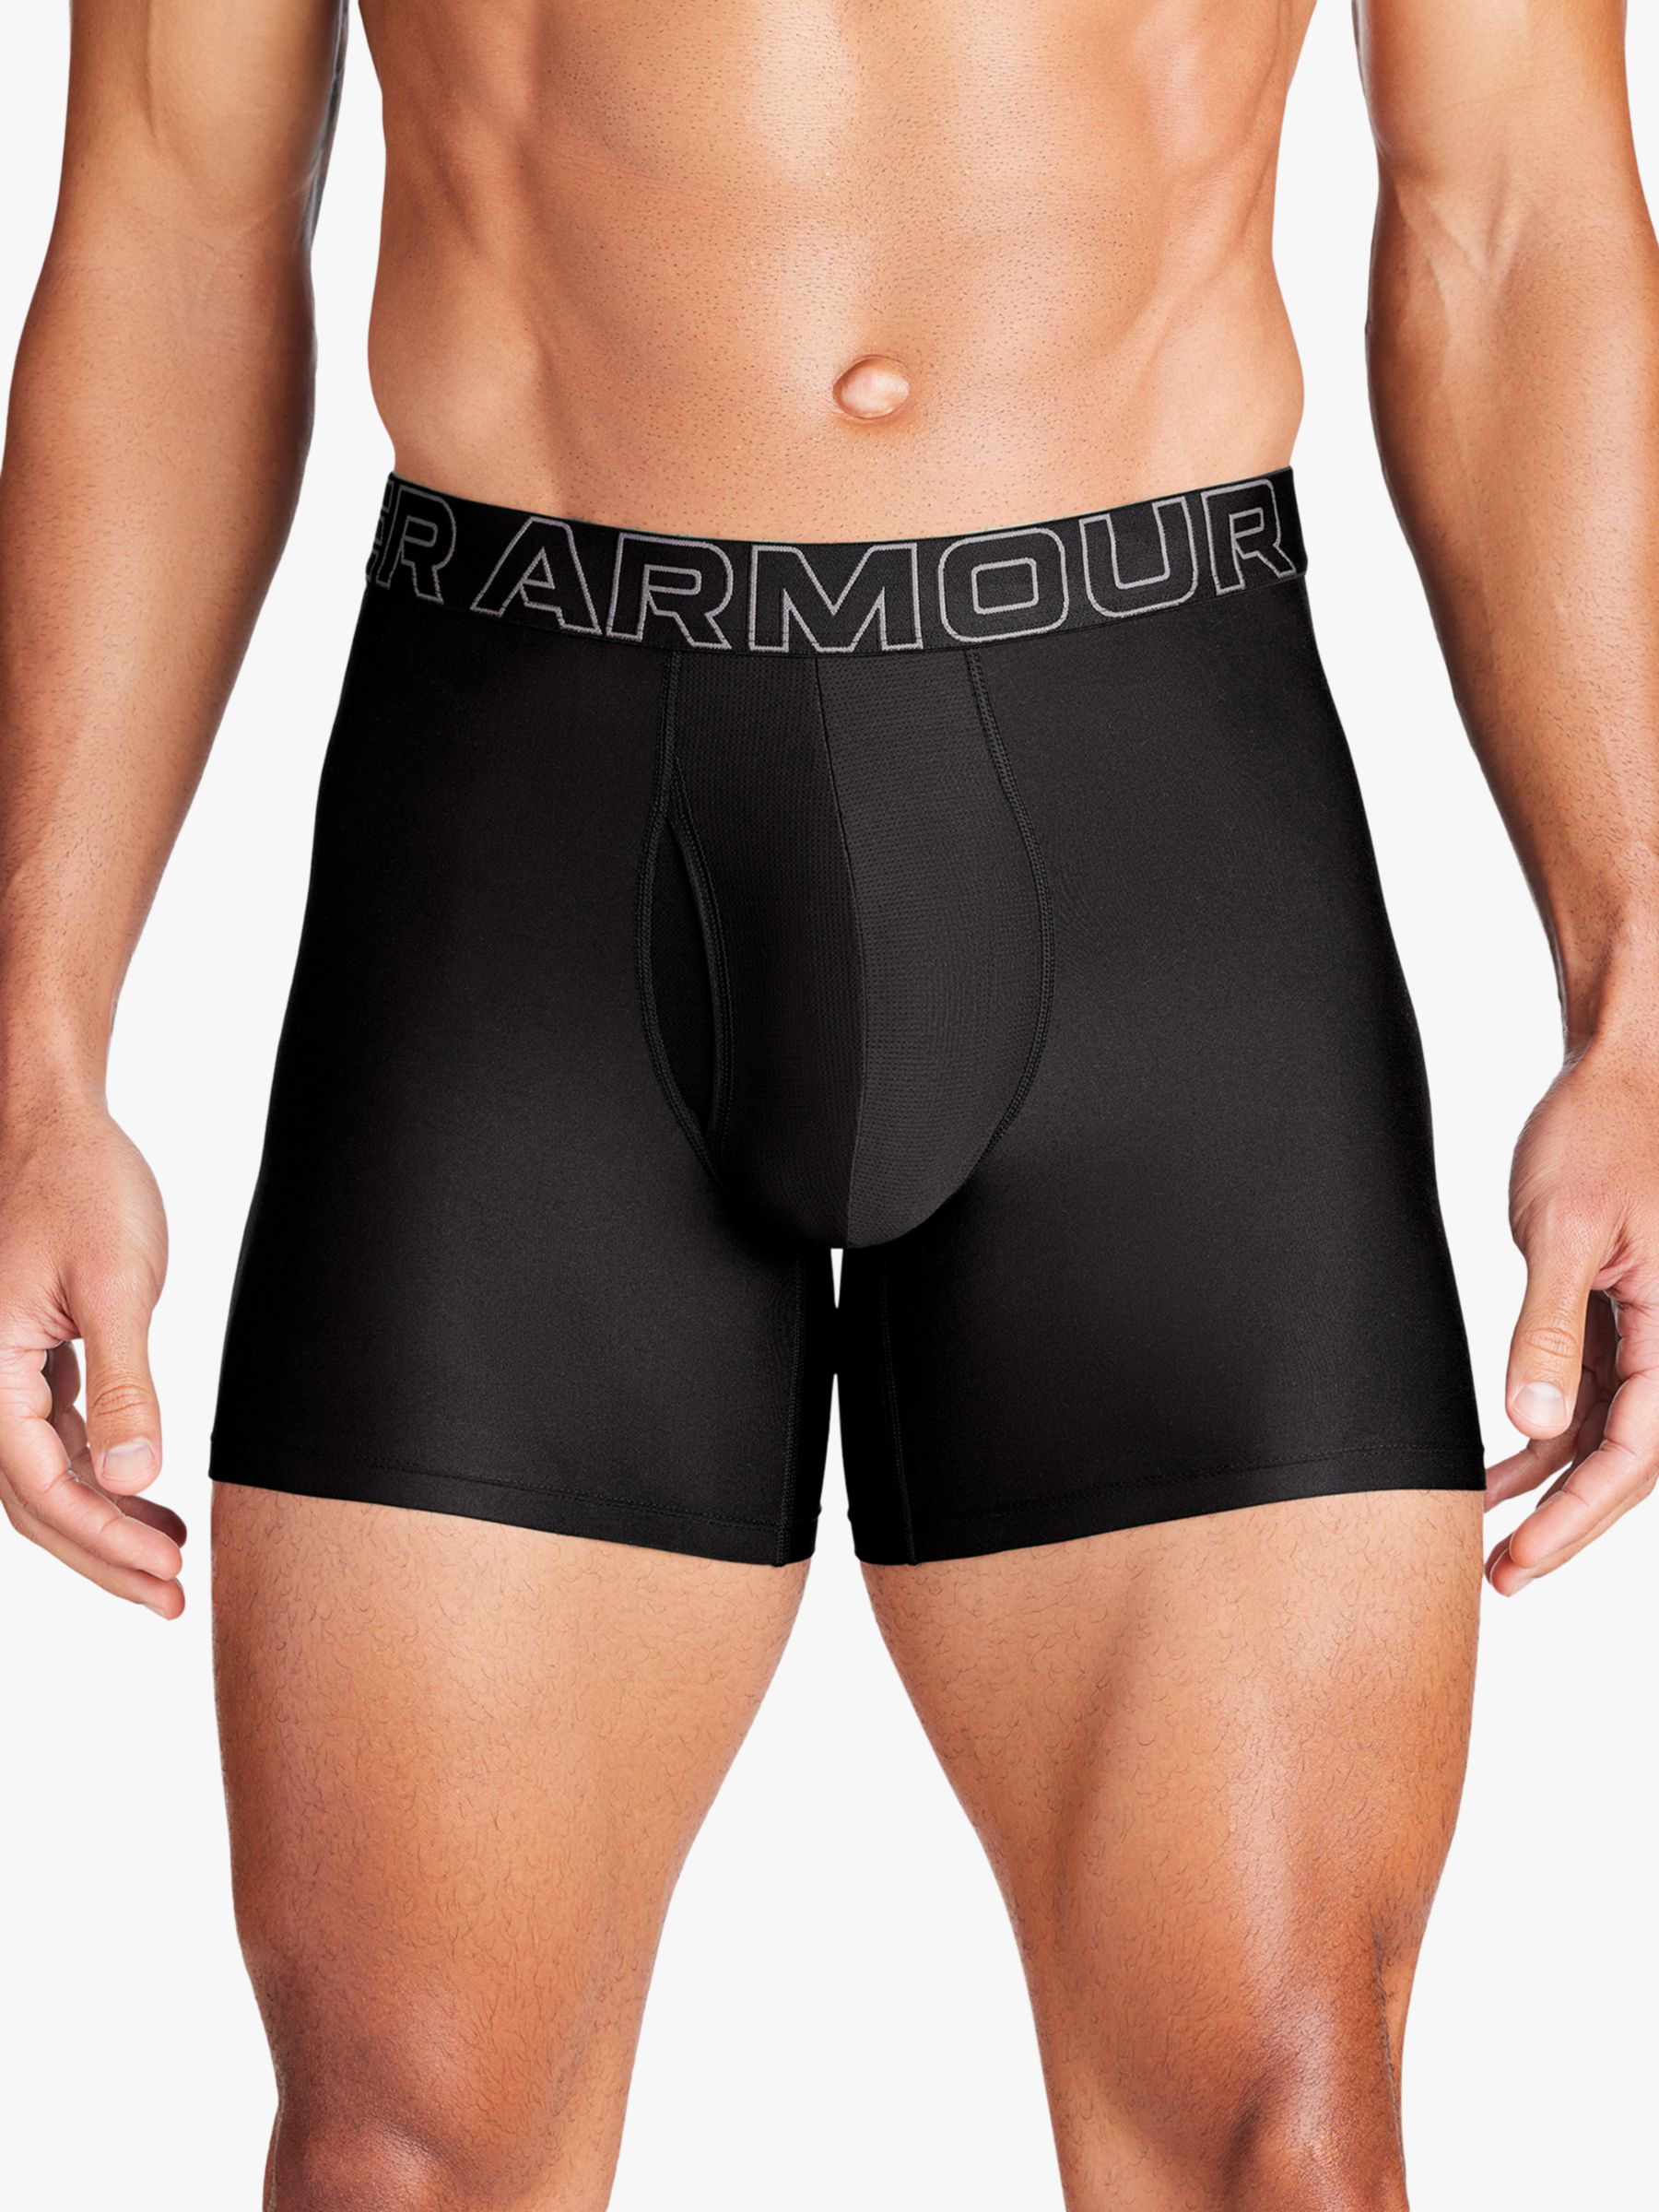 Under Armour Tech 6" Boxers, Pack of 3, Black, S